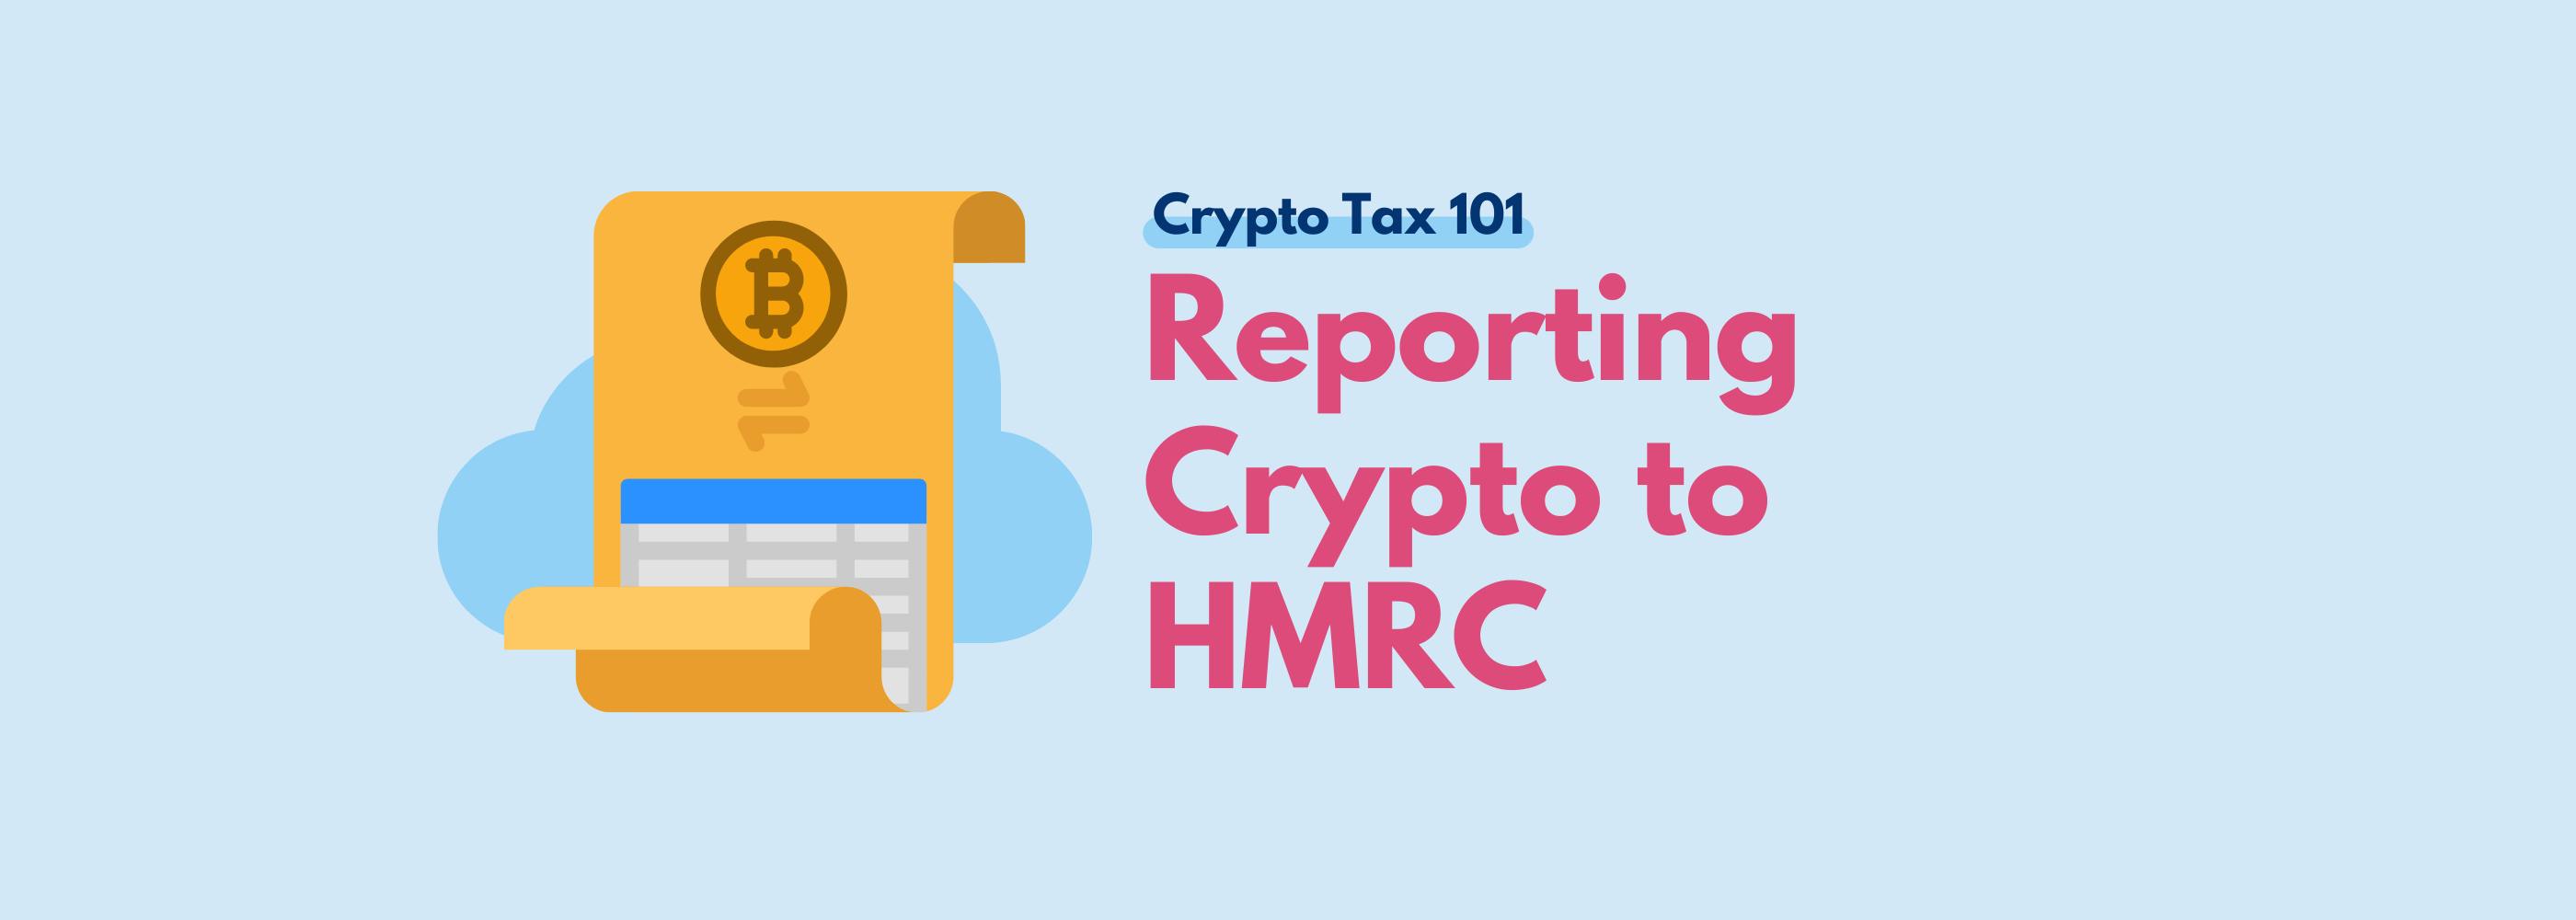 How To Report Cryptocurrency To HMRC Koinly